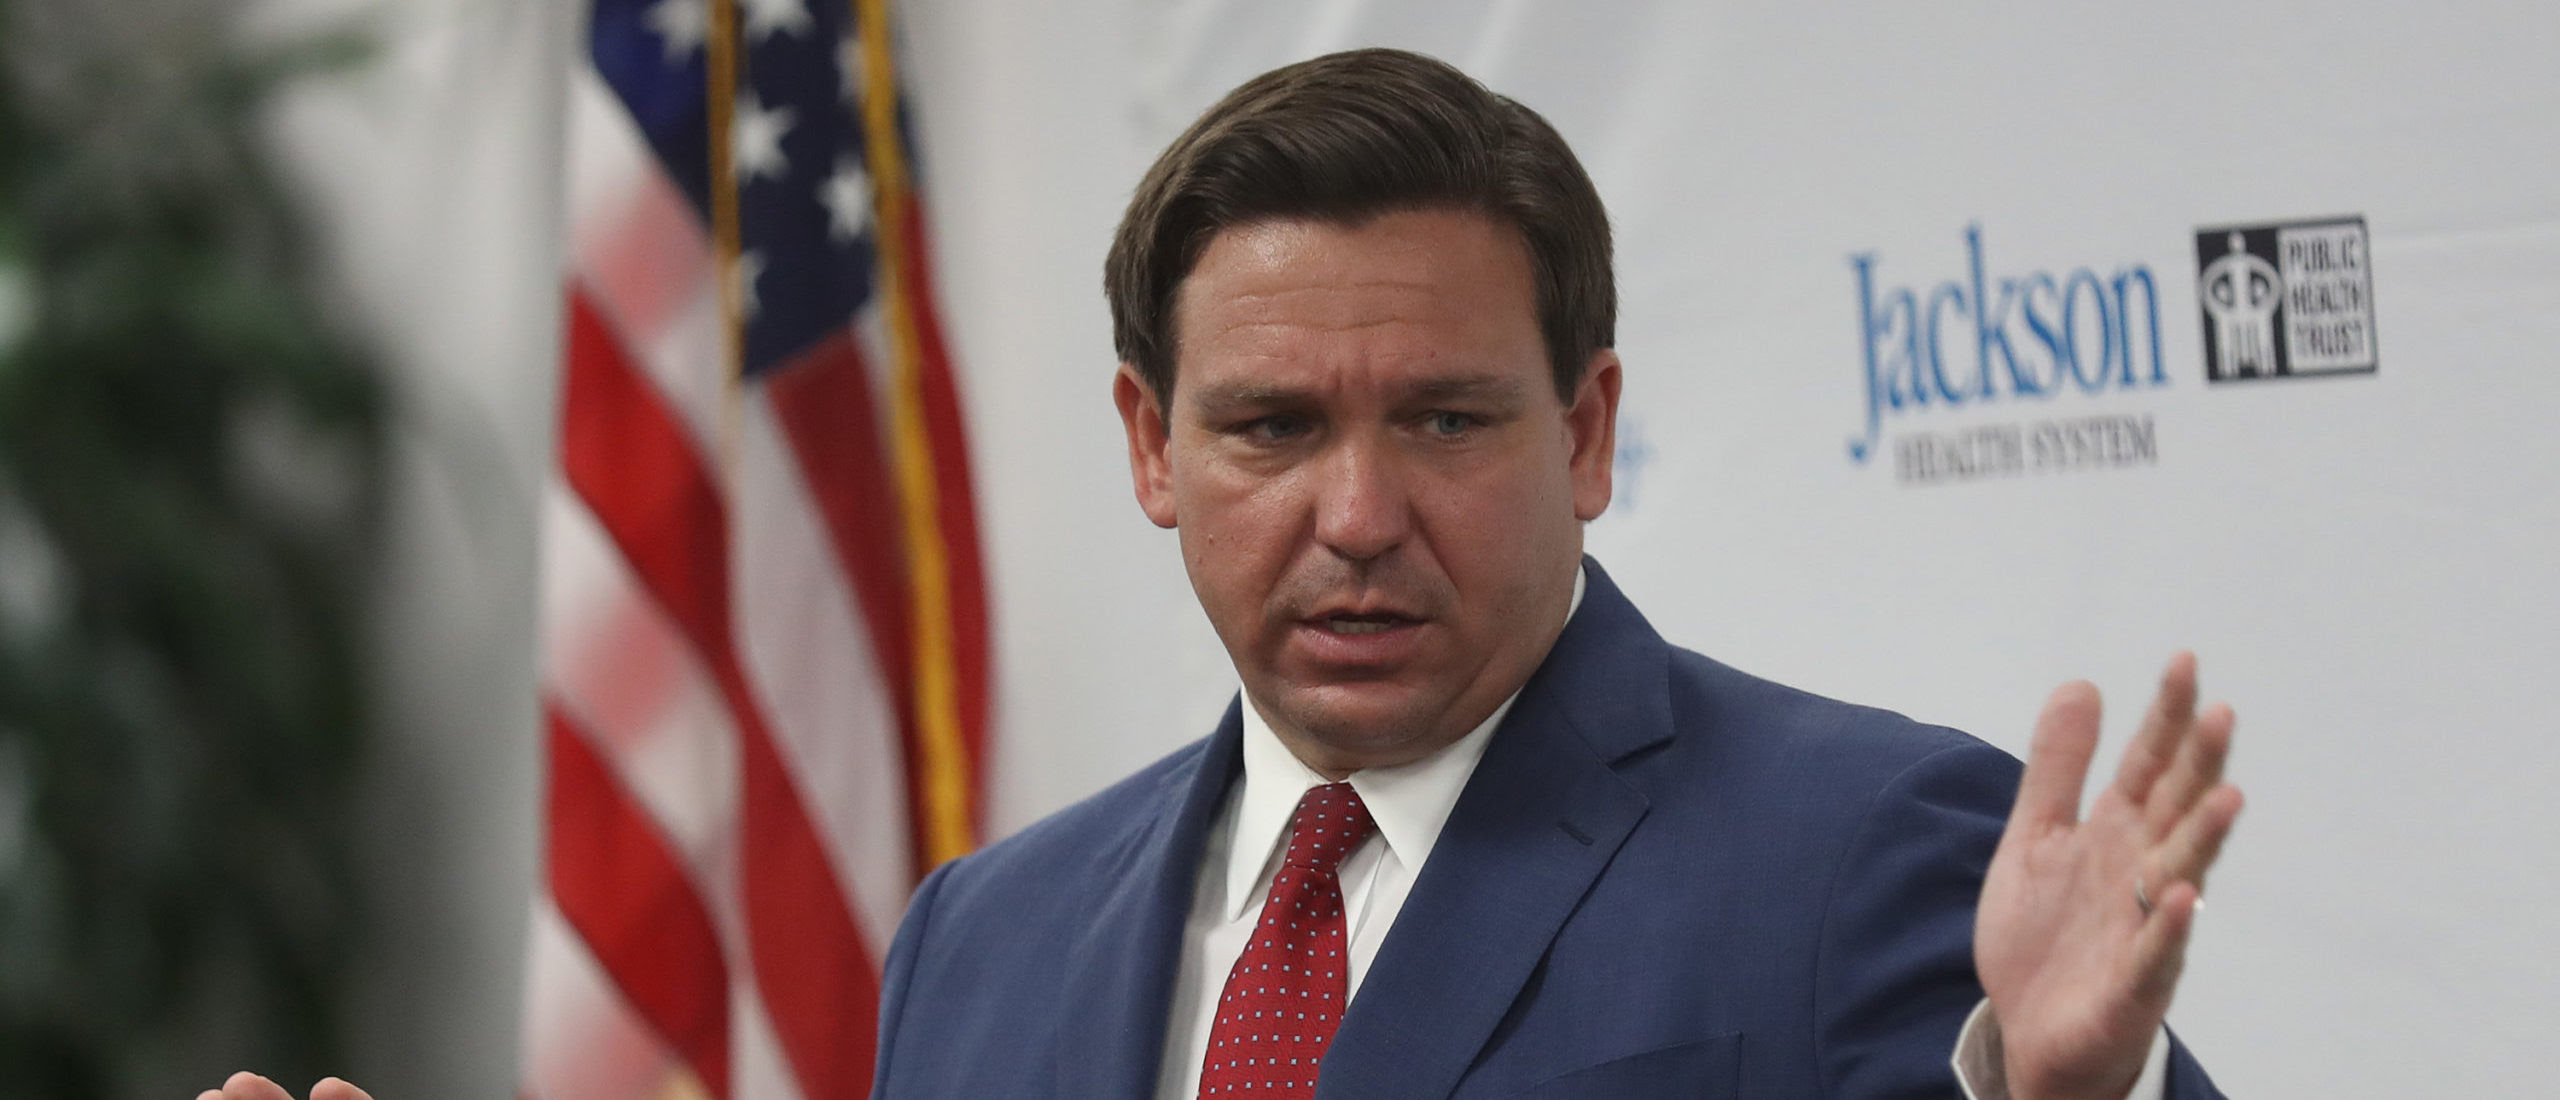 ‘The View’ Tried To Bring On DeSantis For A Guest Appearance. Here’s How His Press Team Responded